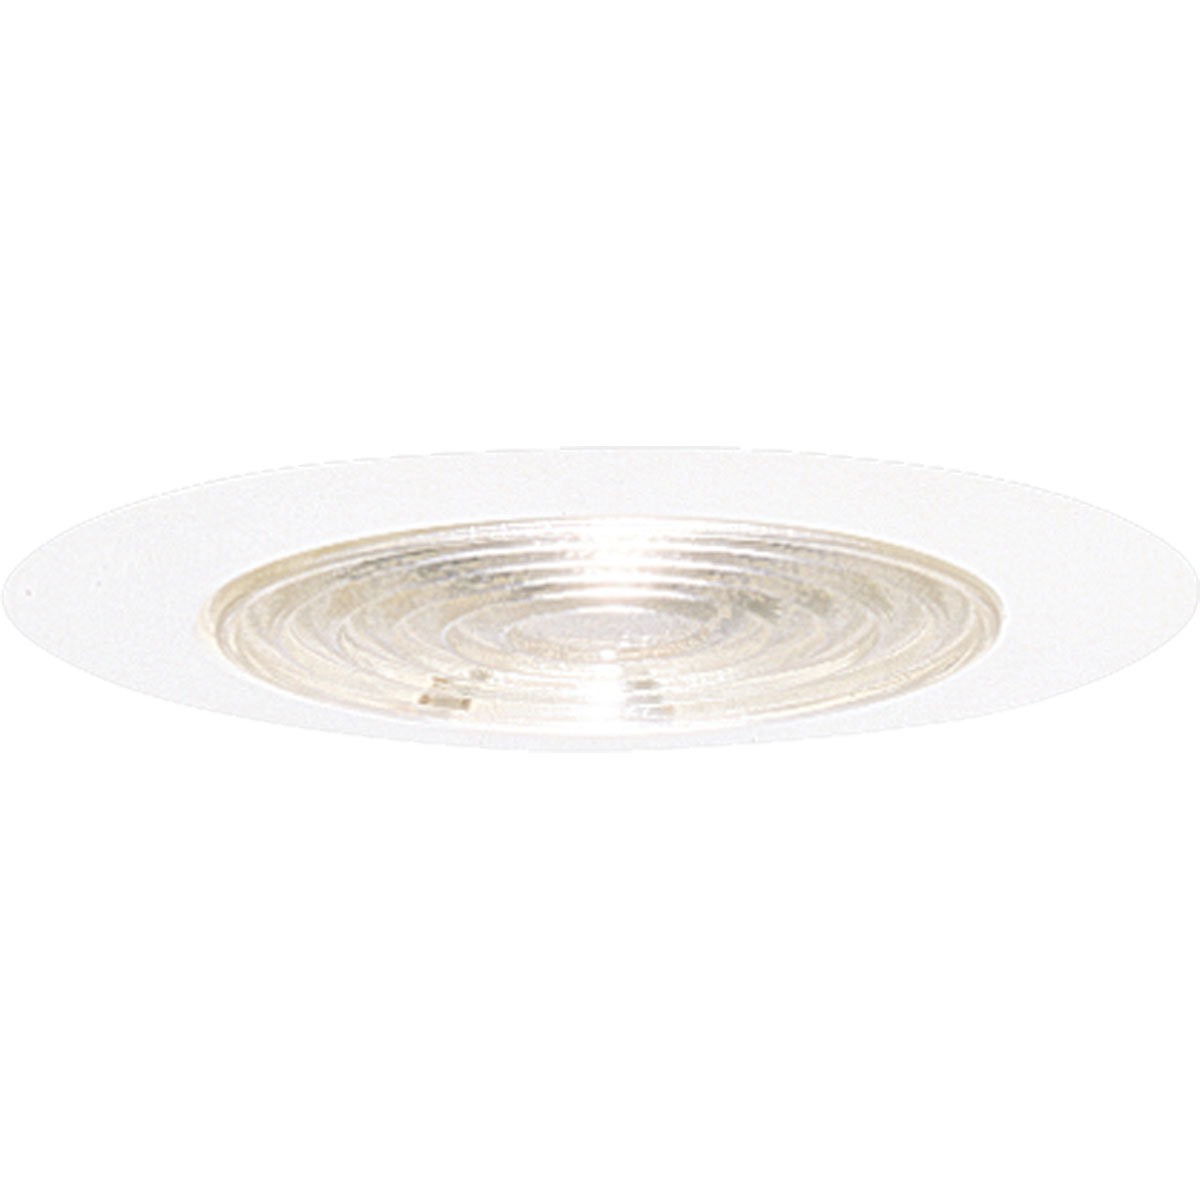 6 in Fresnel Lens Shower Light with Reflector with Fresnel Glass lens and bright white powdered painted metal flange. 7-3/4 in outside diameter.